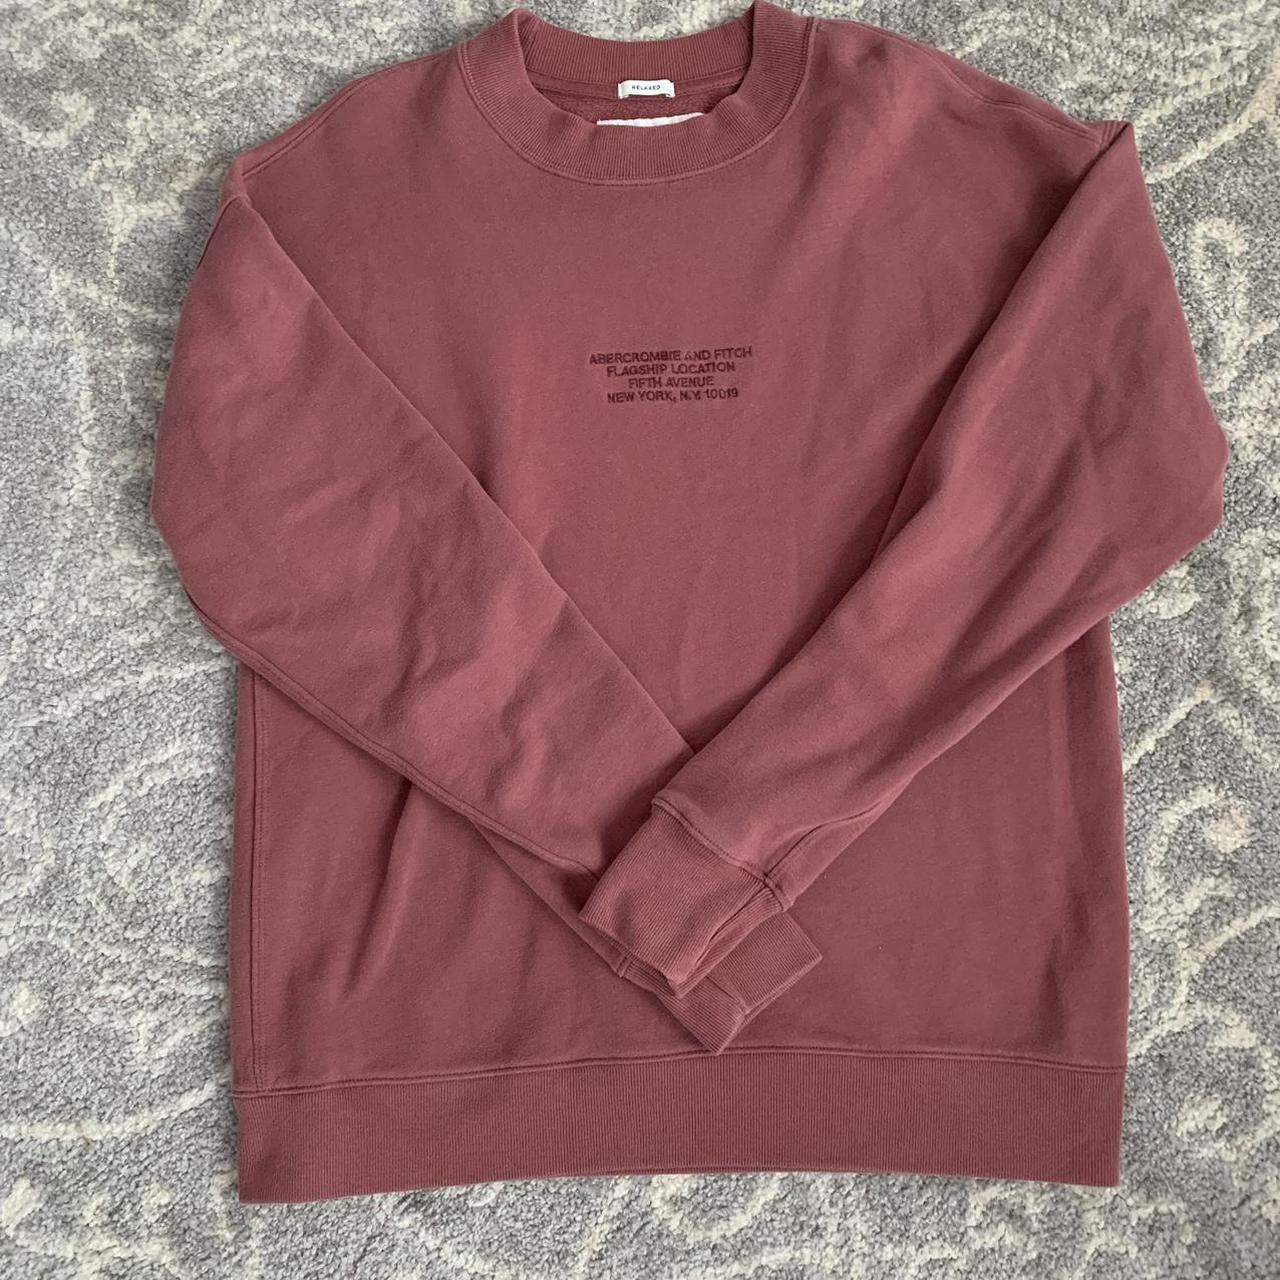 abercrombie and fitch crewneck! minor flaw seen on... - Depop